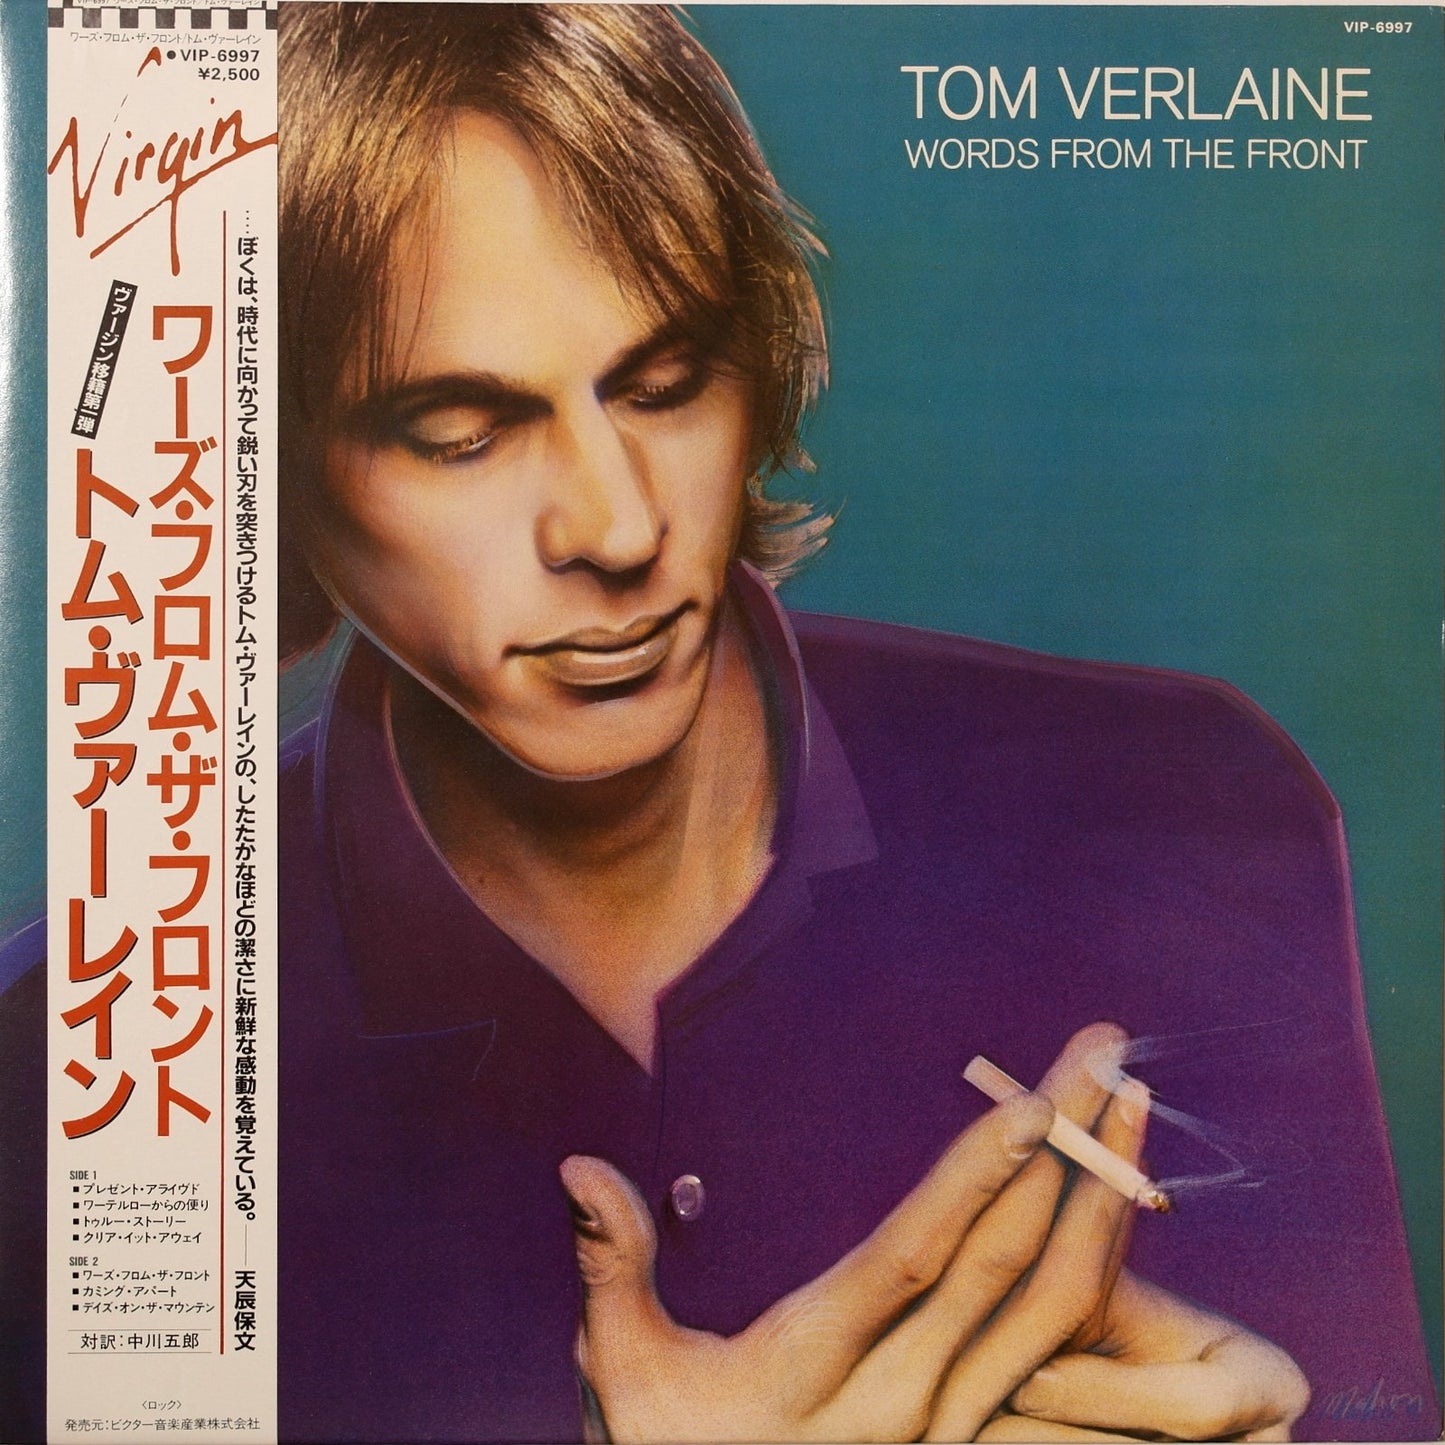 TOM VERLAINE - Words From The Front